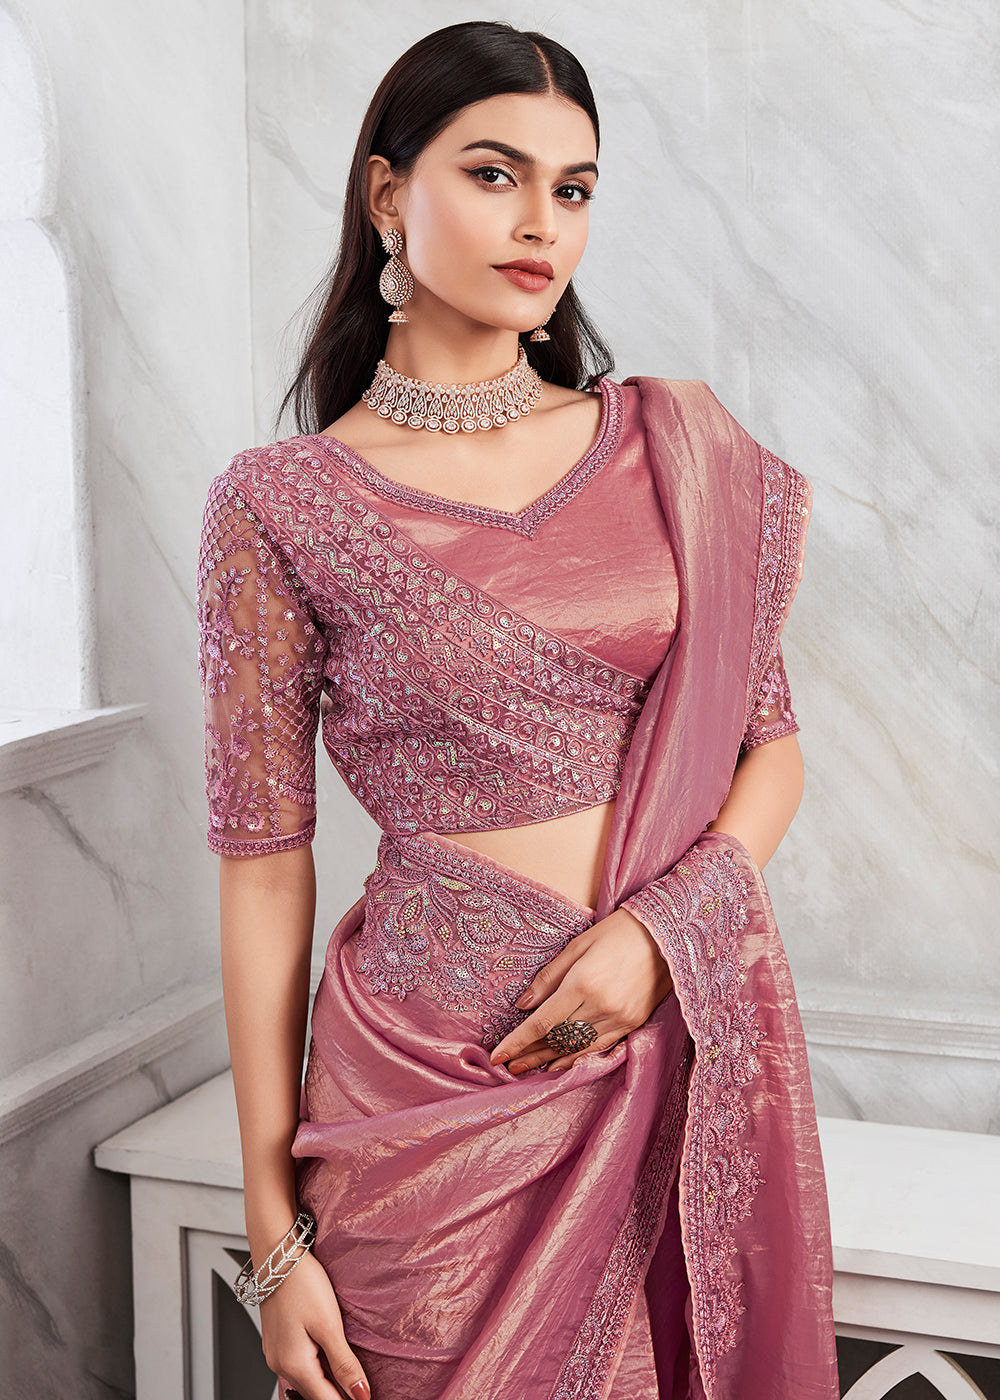 Buy Now Lovely Dusty Pink Silk Embroidered Designer Saree Online in USA, UK, Canada & Worldwide at Empress Clothing.